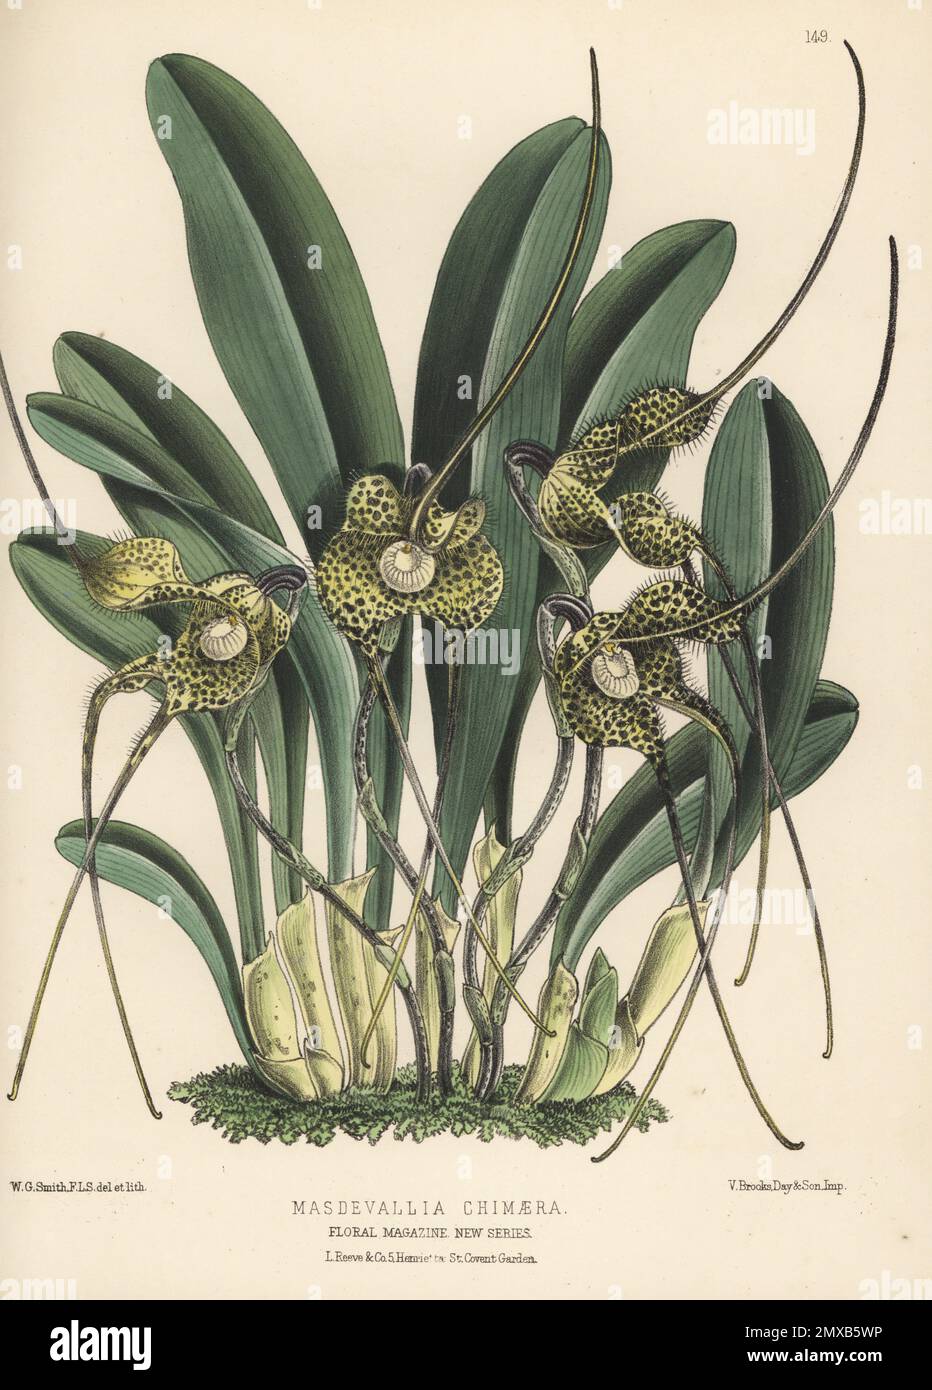 Dracula nycterina orchid, native to Colombia. Flowered by William Bull at his Chelsea nursery. As Masdevallia chimaera, discovered by orchid collector Benedikt Roezl. Handcolored botanical illustration drawn and lithographed by Worthington George Smith from Henry Honywood Dombrain's Floral Magazine, New Series, Volume 4, L. Reeve, London, 1875. Lithograph printed by Vincent Brooks, Day & Son. Stock Photo